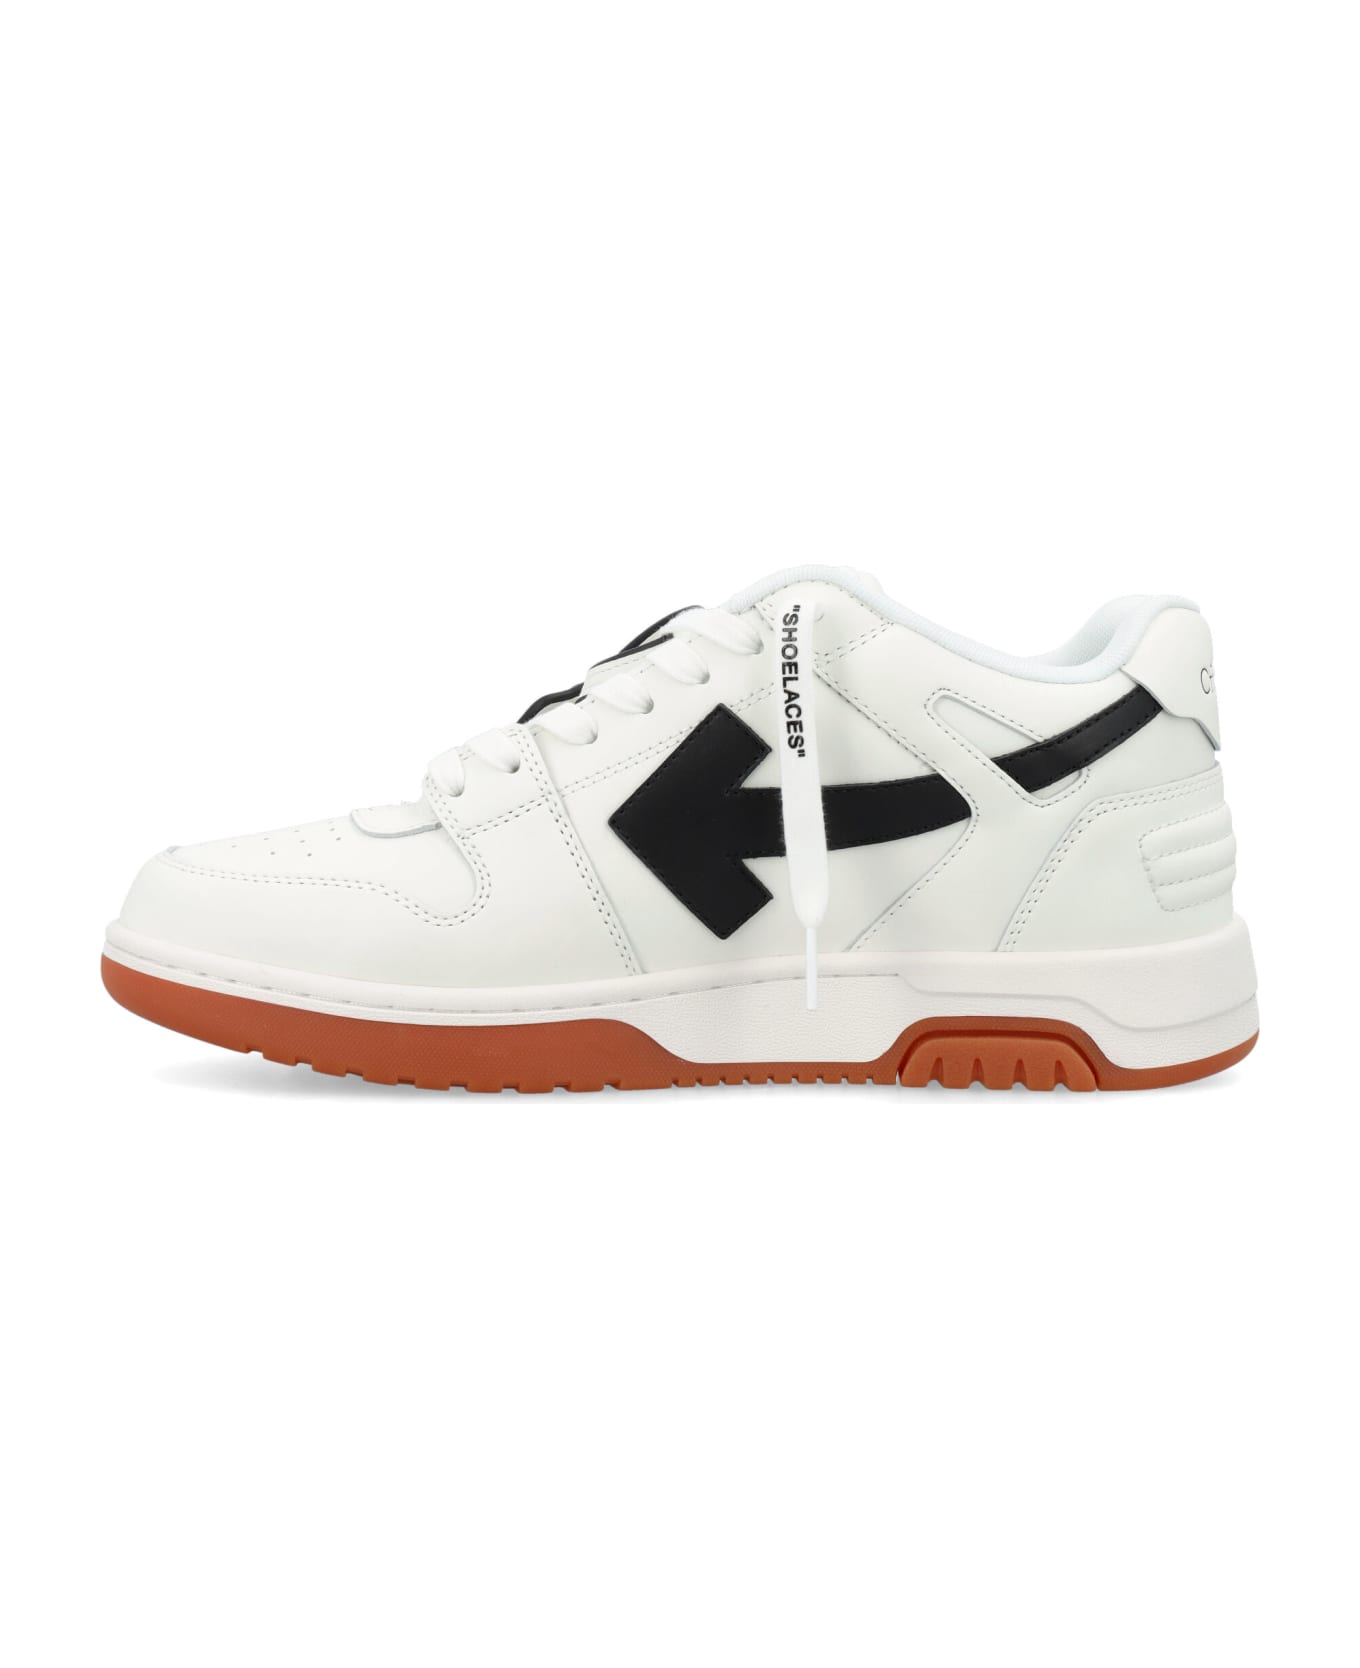 Off-White Out Of Office Sneakers - WHITE BLACK